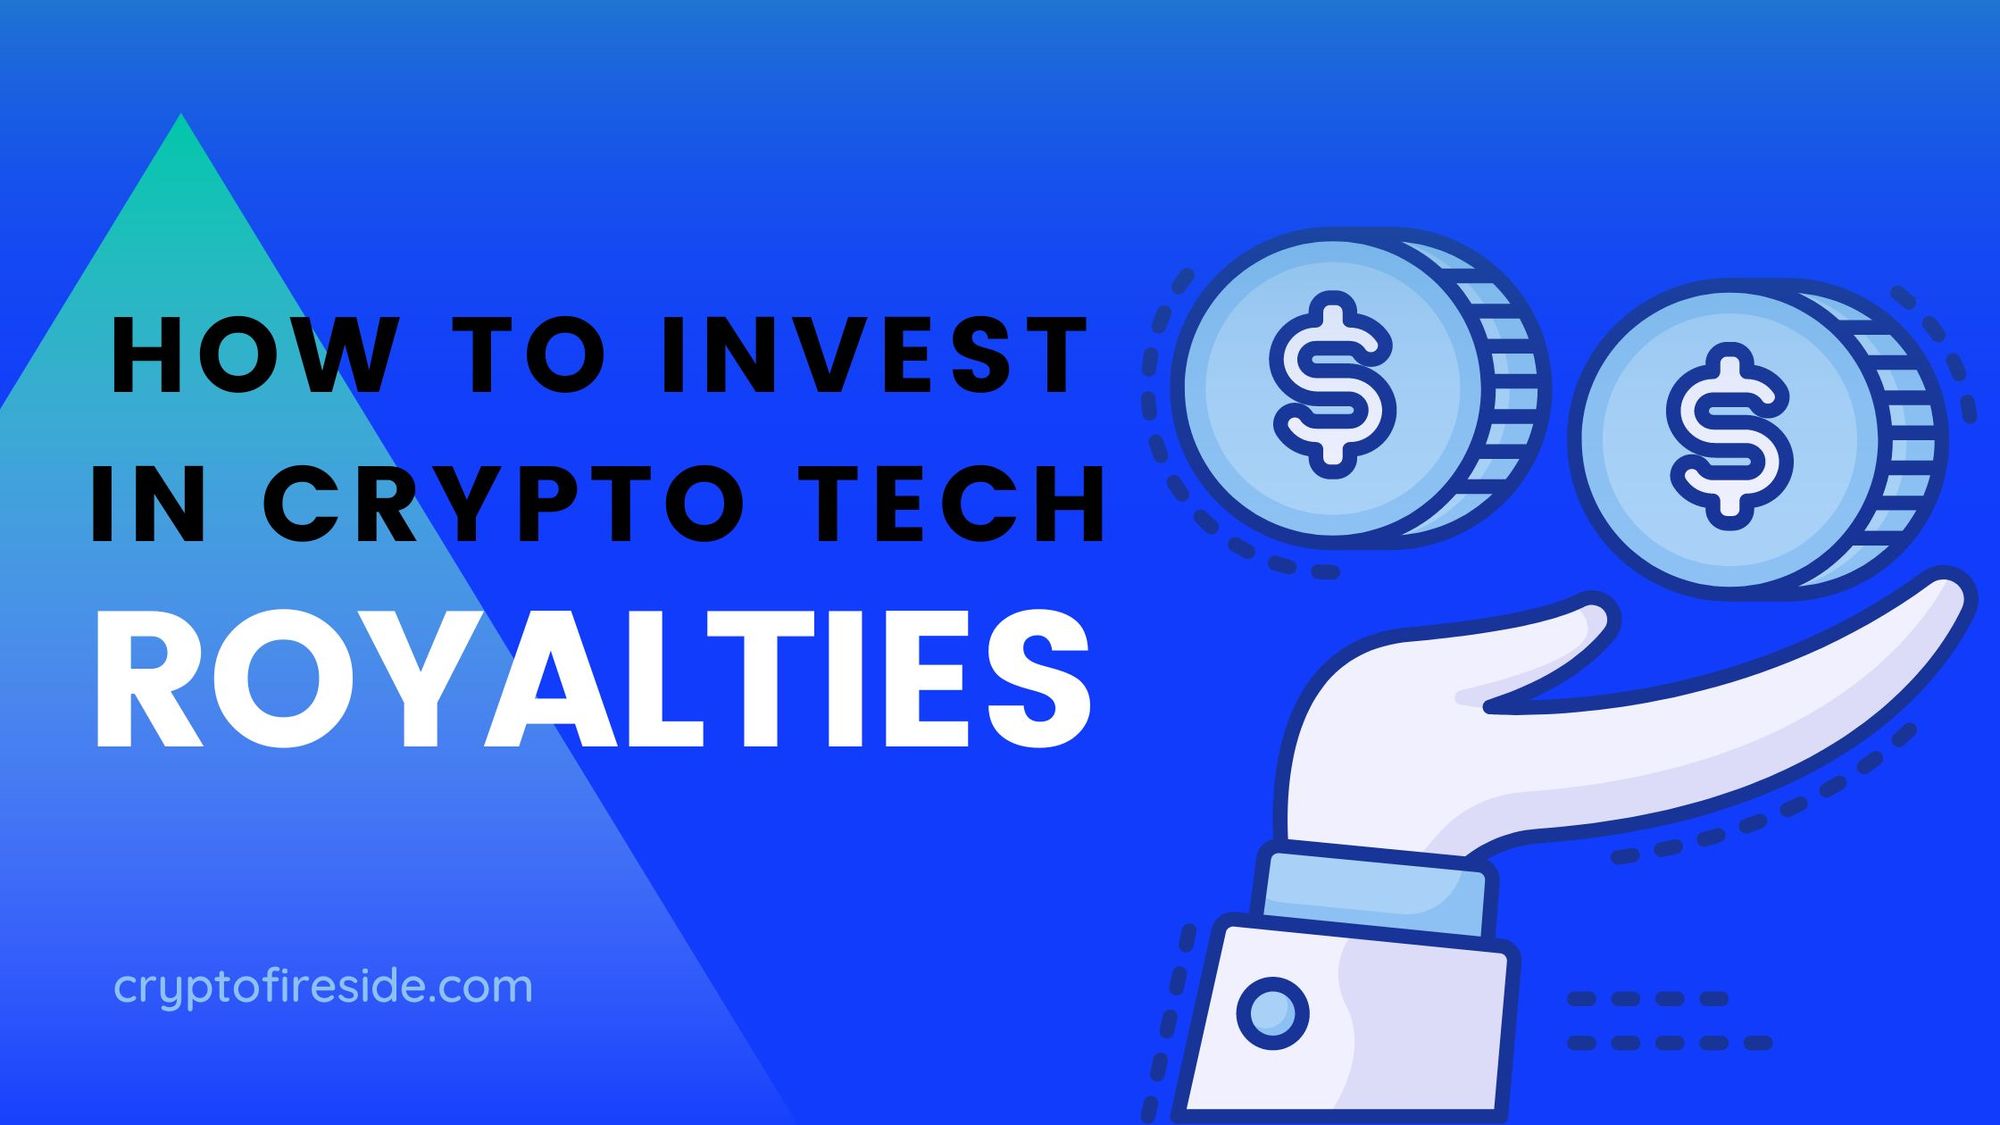 How to Invest in Crypto Tech Royalties